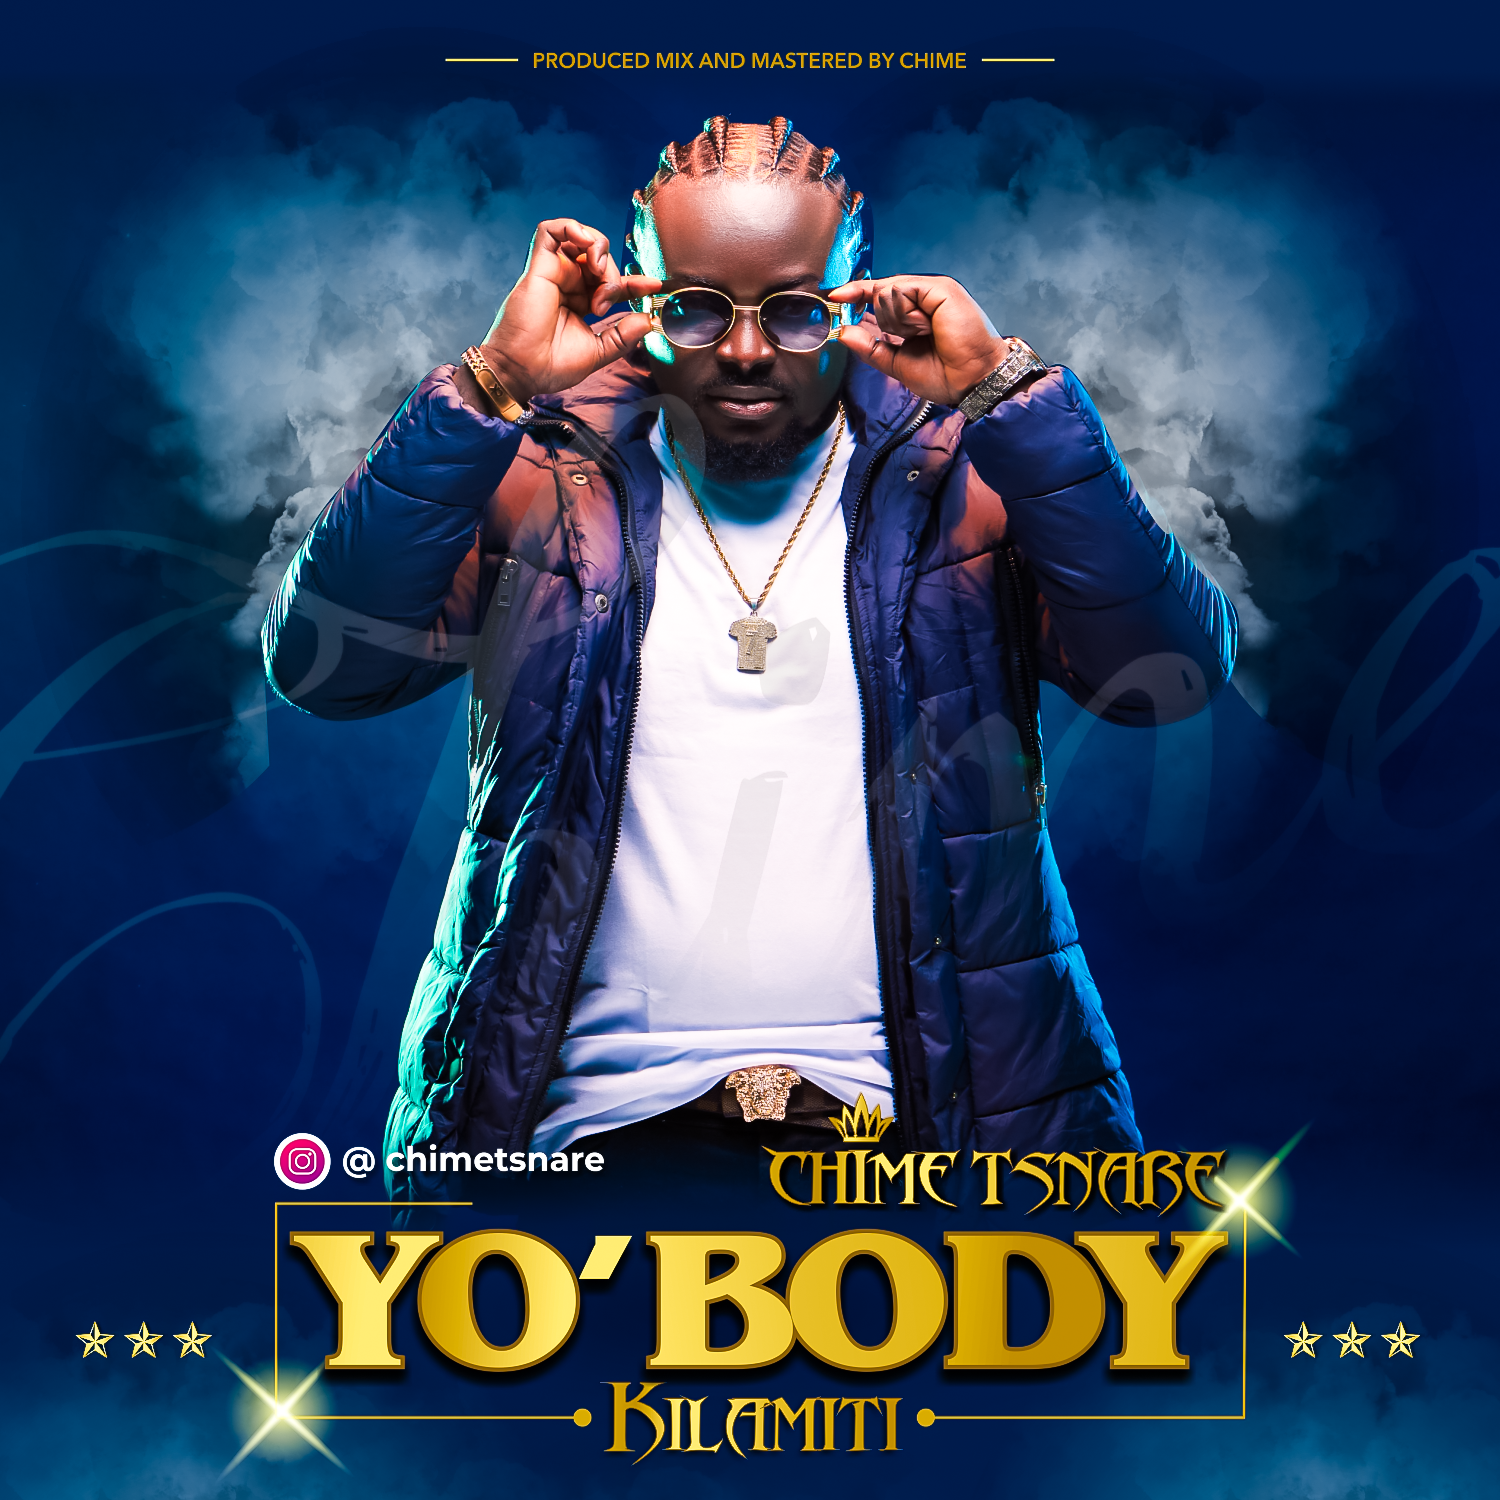 Chime Tsnare releases single titled 'Yobody'